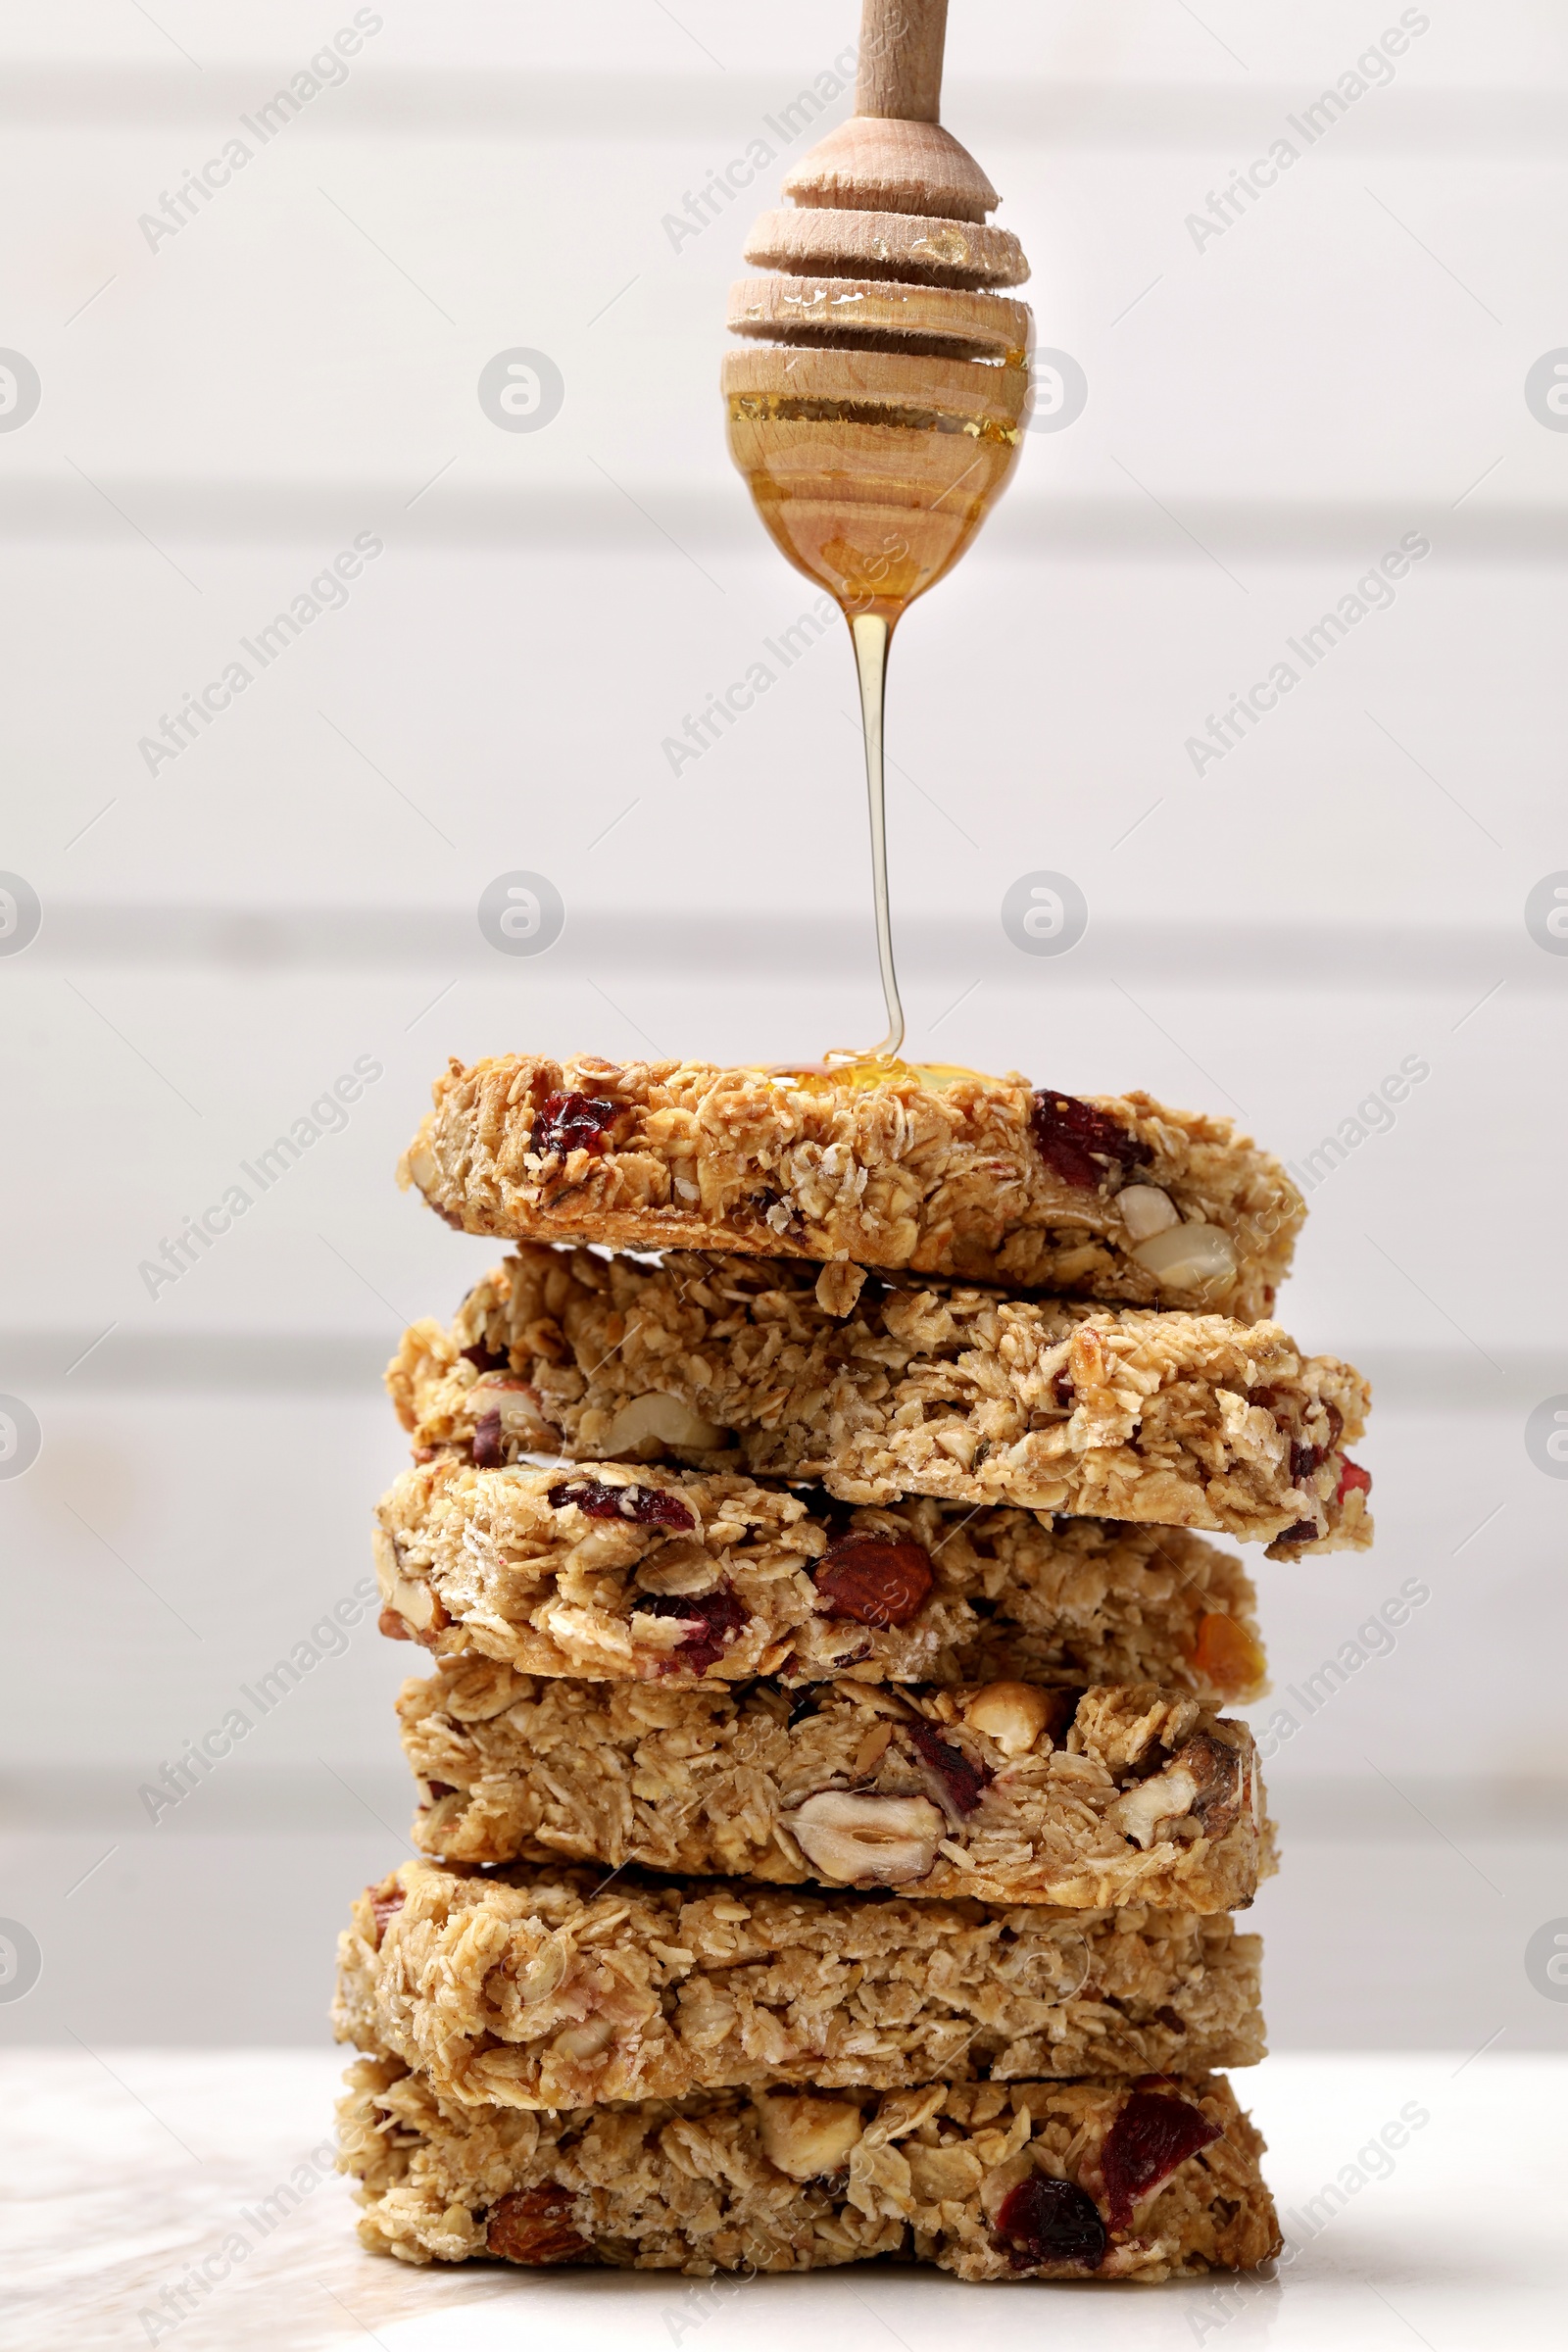 Photo of Pouring honey from dipper onto stack of tasty granola bars on white table